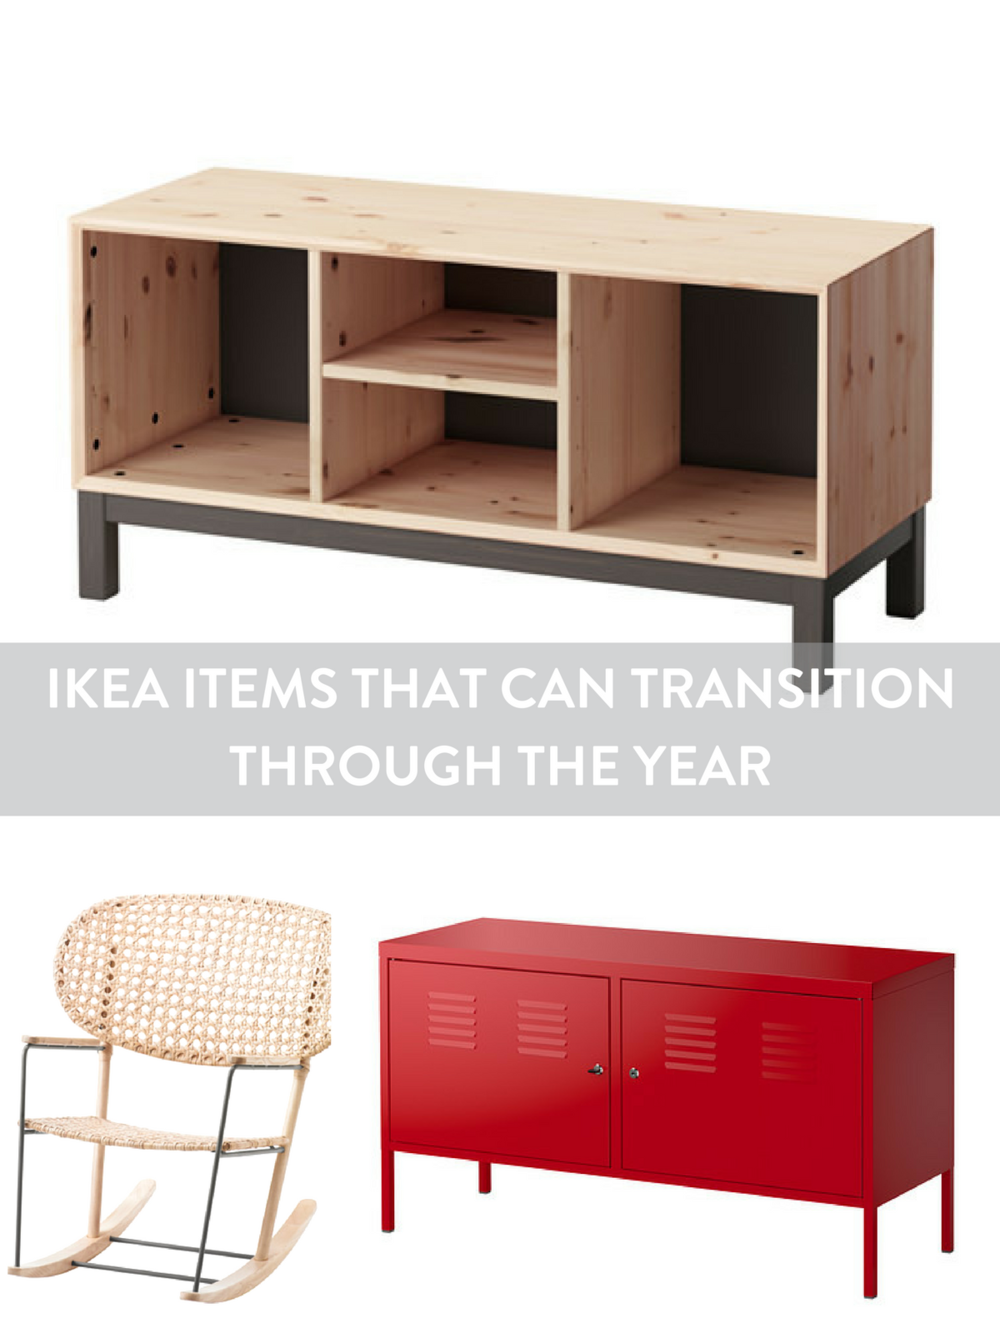 IKEA Must-Haves That Can Adapt to Every Season